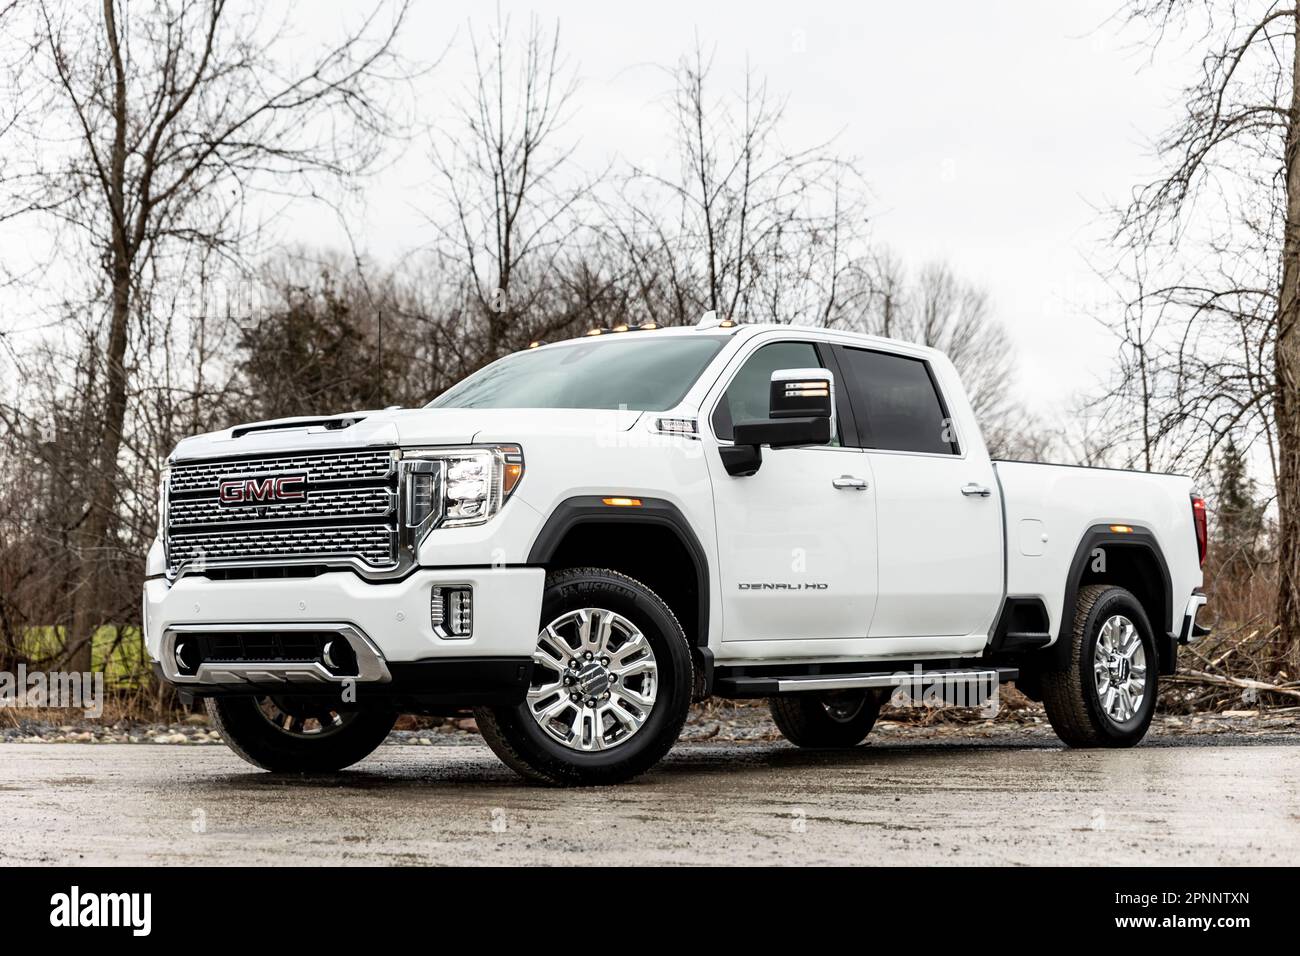 A white GMC truck parked on a concrete surface in a natural setting. Stock Photo